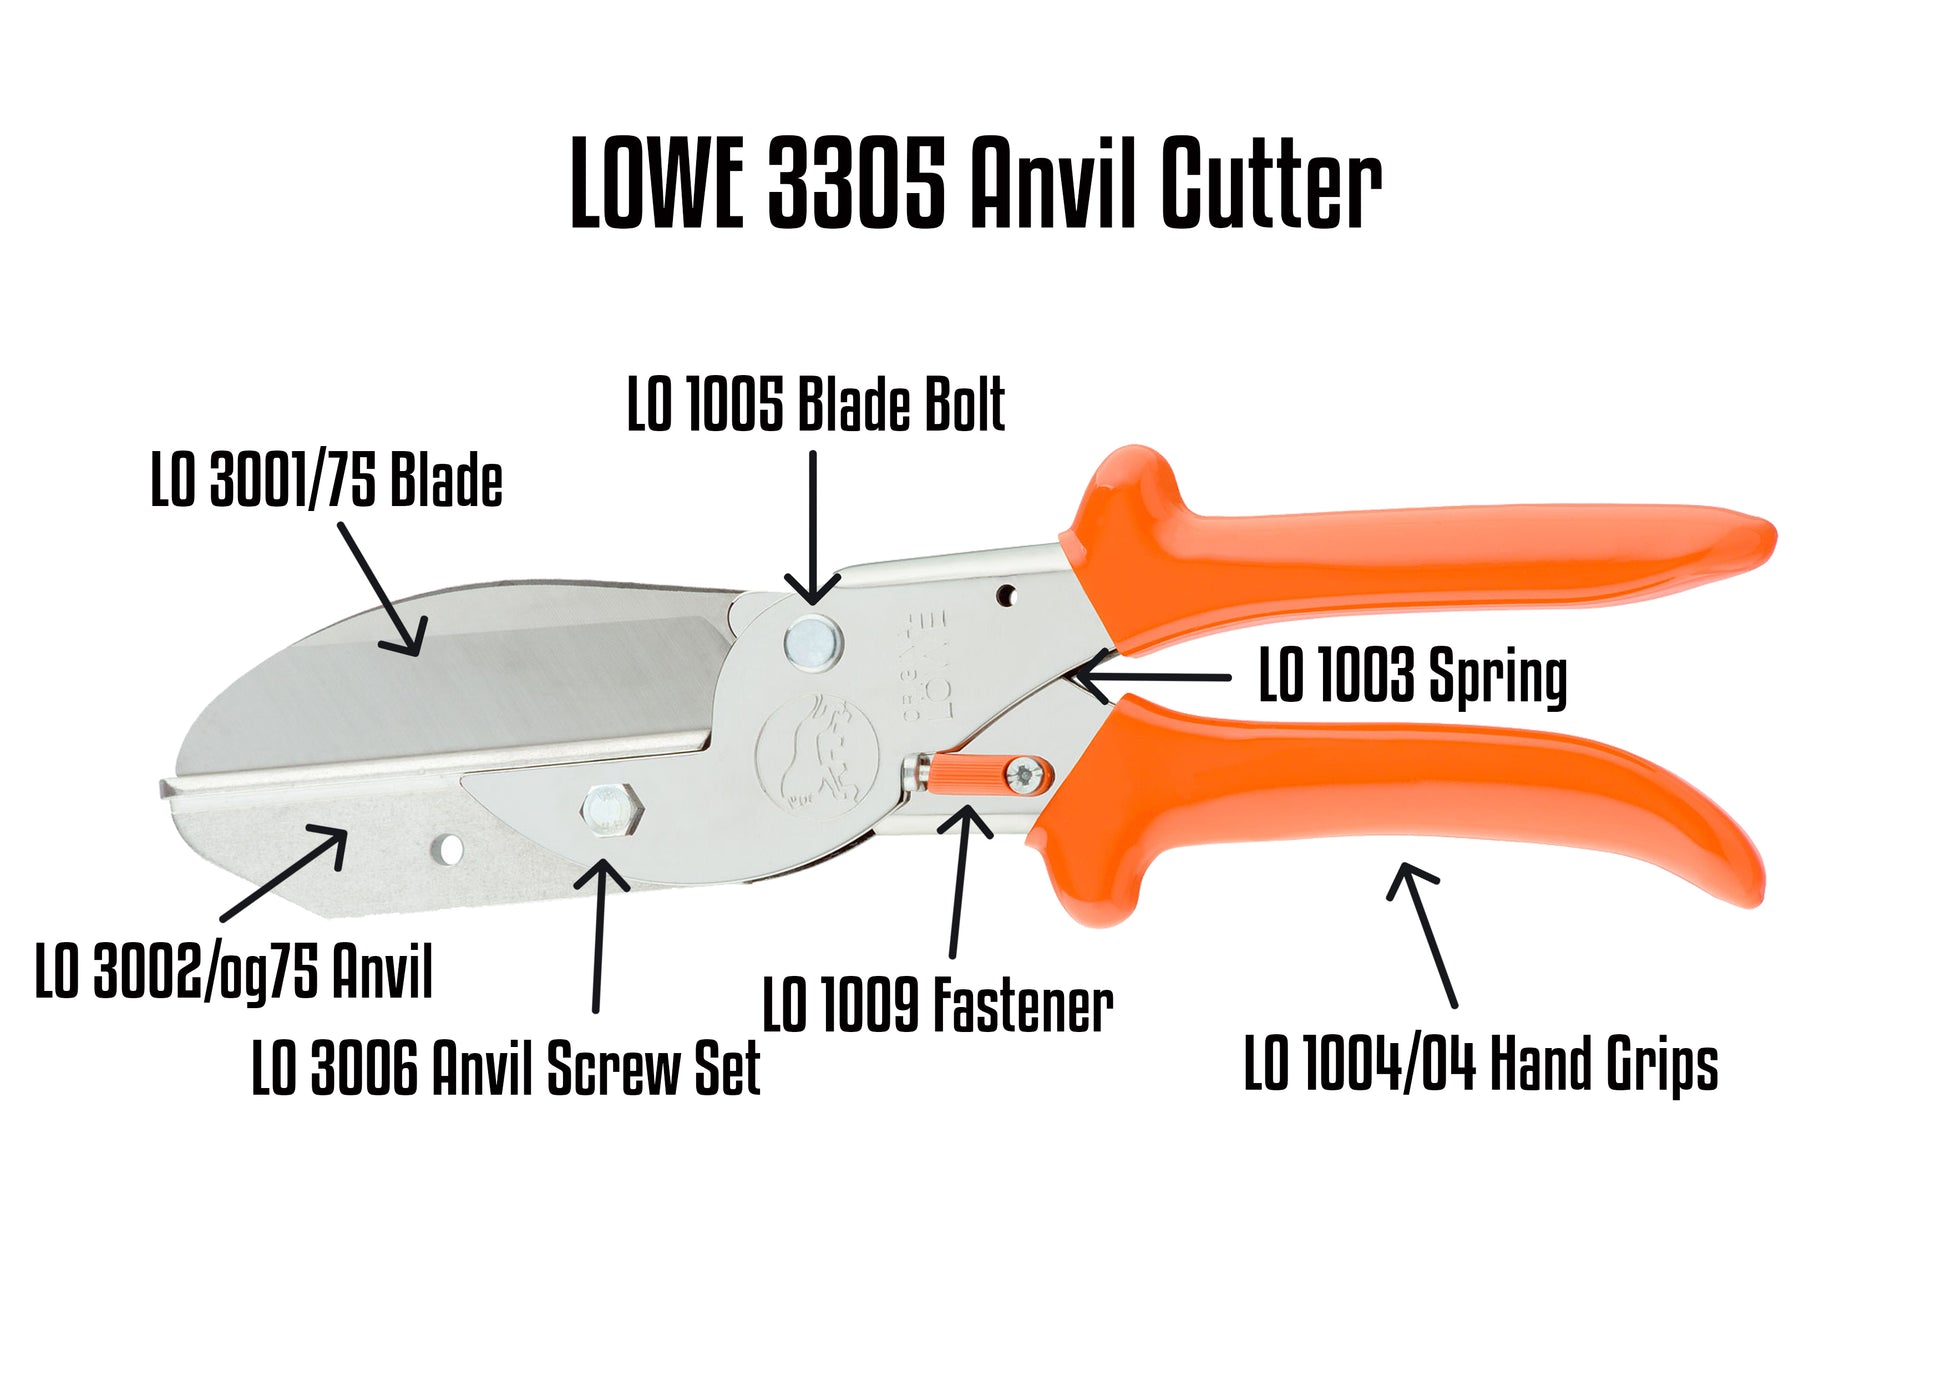 Lowe 3305 Parts Guide